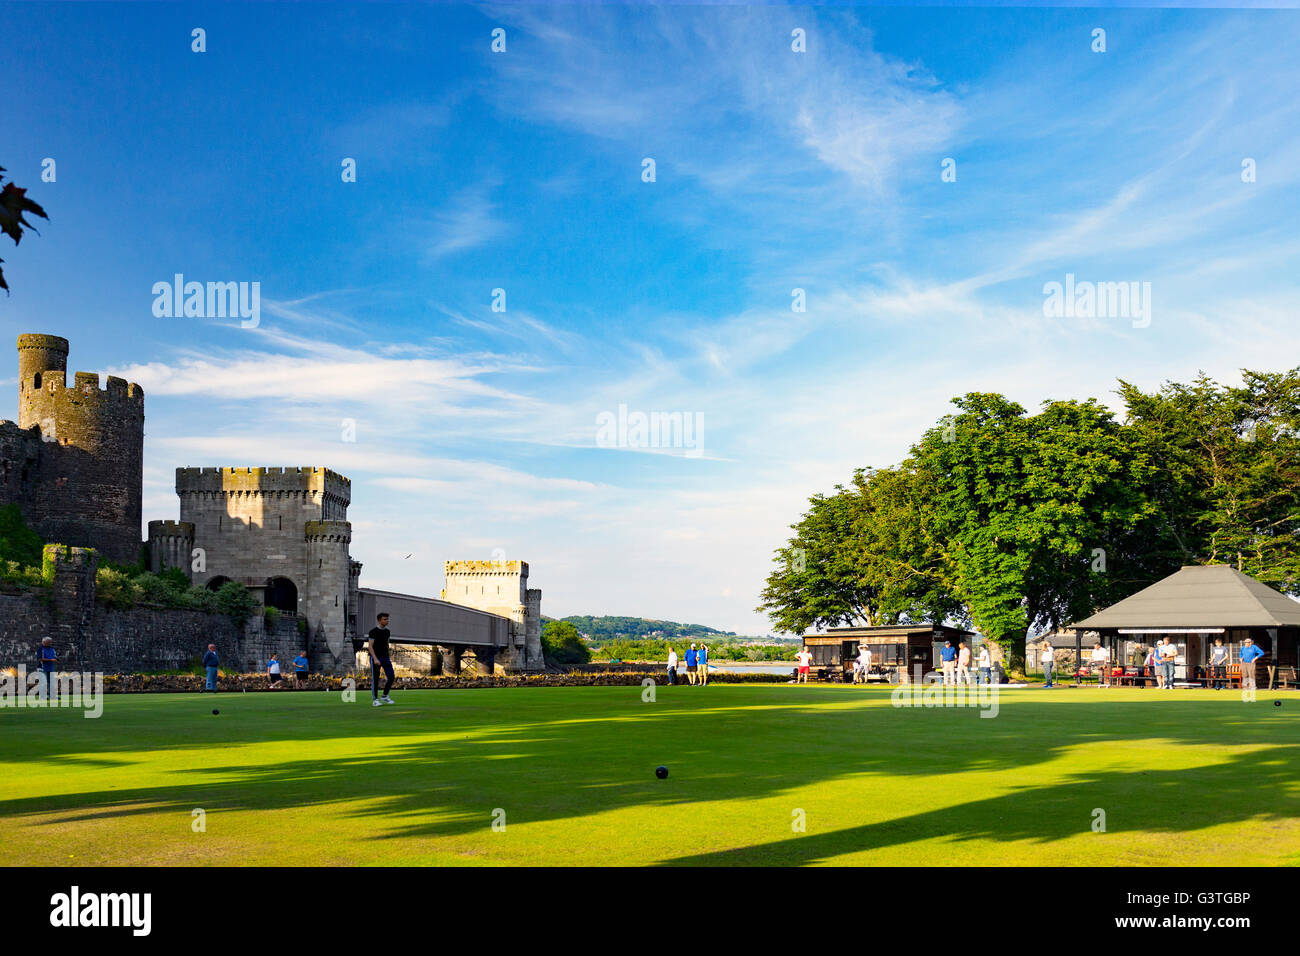 Conwy Bowling Club a crown green bowling venue next to the majestic medieval Conwy Castle on a hot summers evening with bowlers passing the time away relaxing on the green, Cowny, Wales, UK Stock Photo